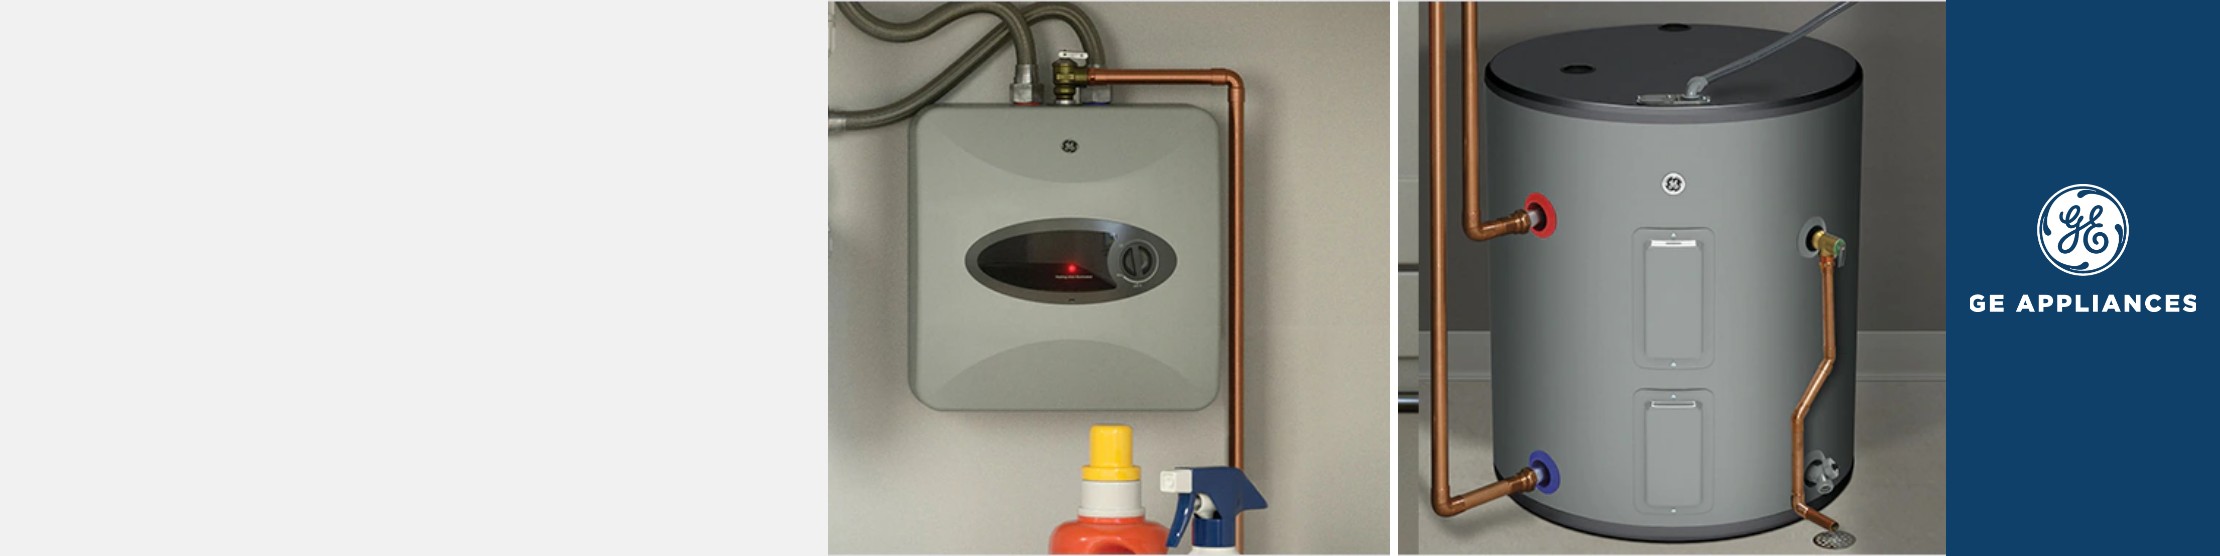 Get 10% off your purchase of 3 or more GE water heaters